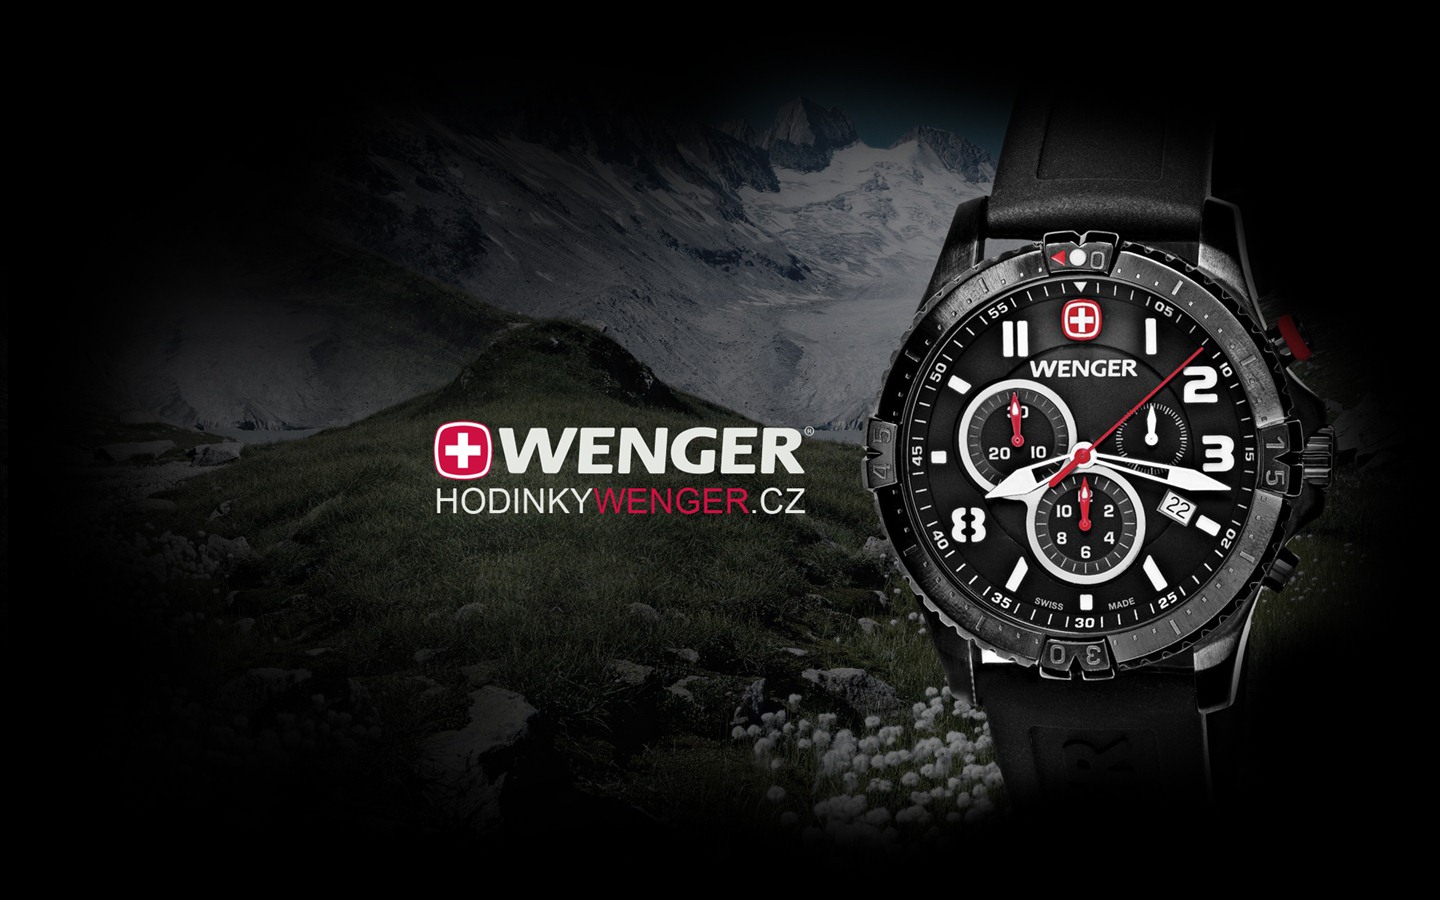 World famous watches wallpapers (1) #1 - 1440x900